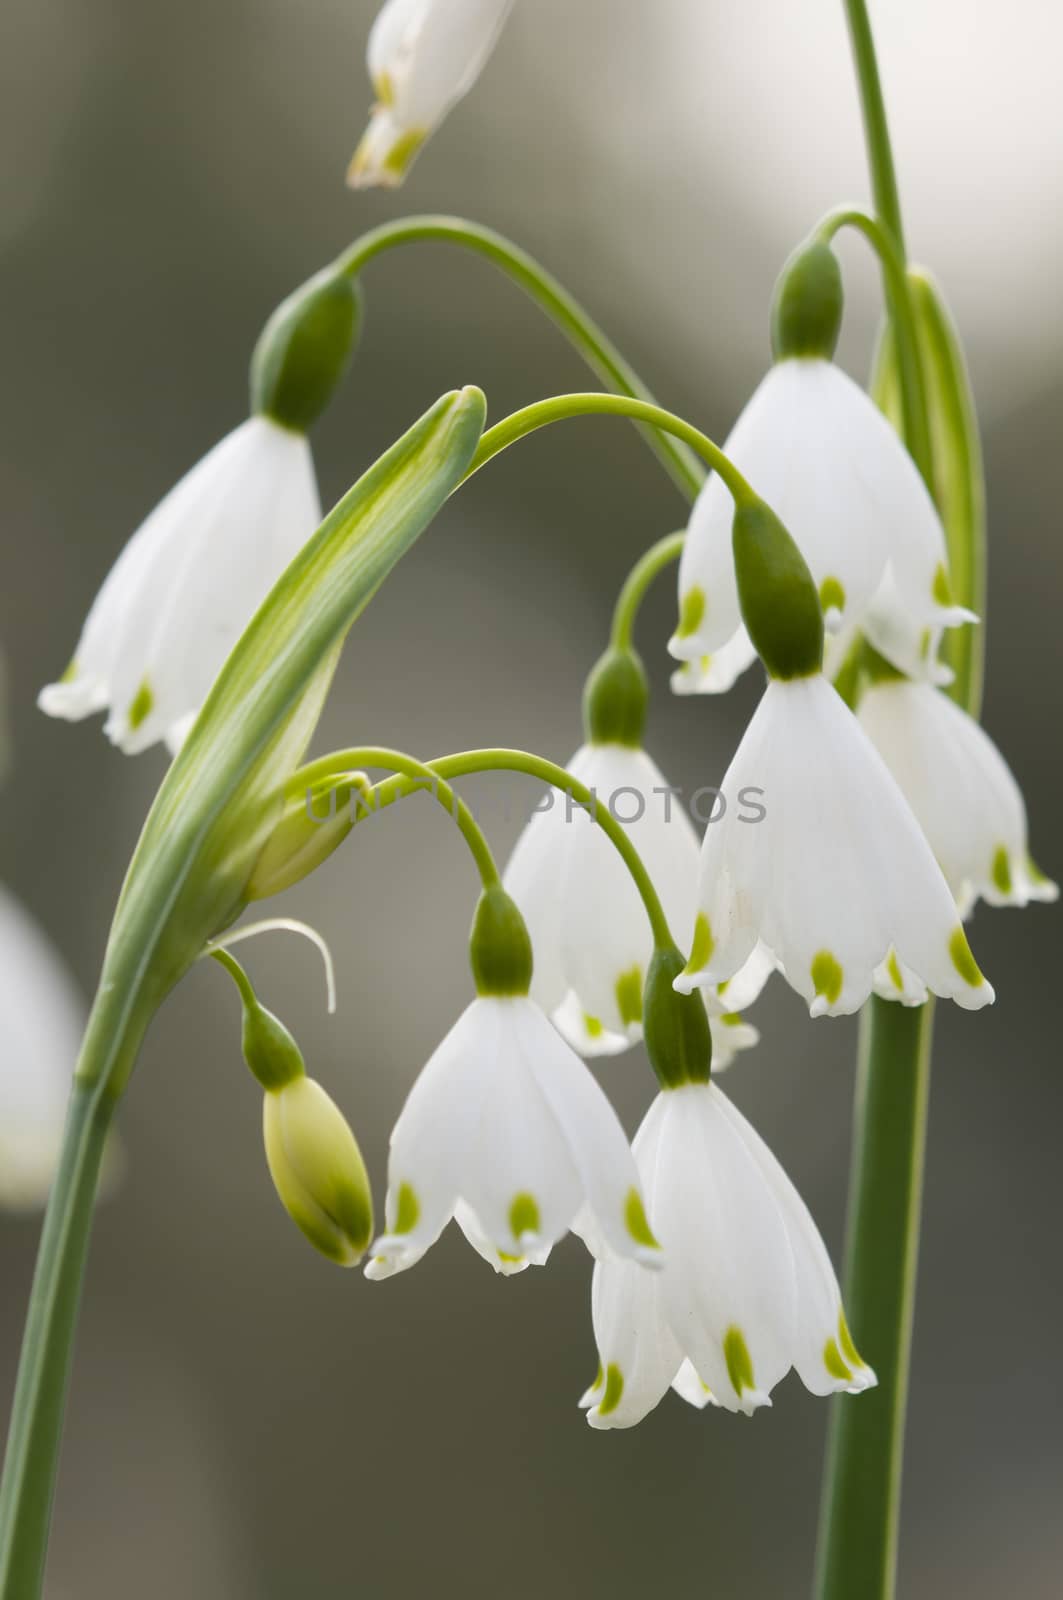 Leucojum vernum, spring snowflake, perennial, herbaceous flowering plant in the daffodil family Amaryllidaceae, native to central and southern Europe.